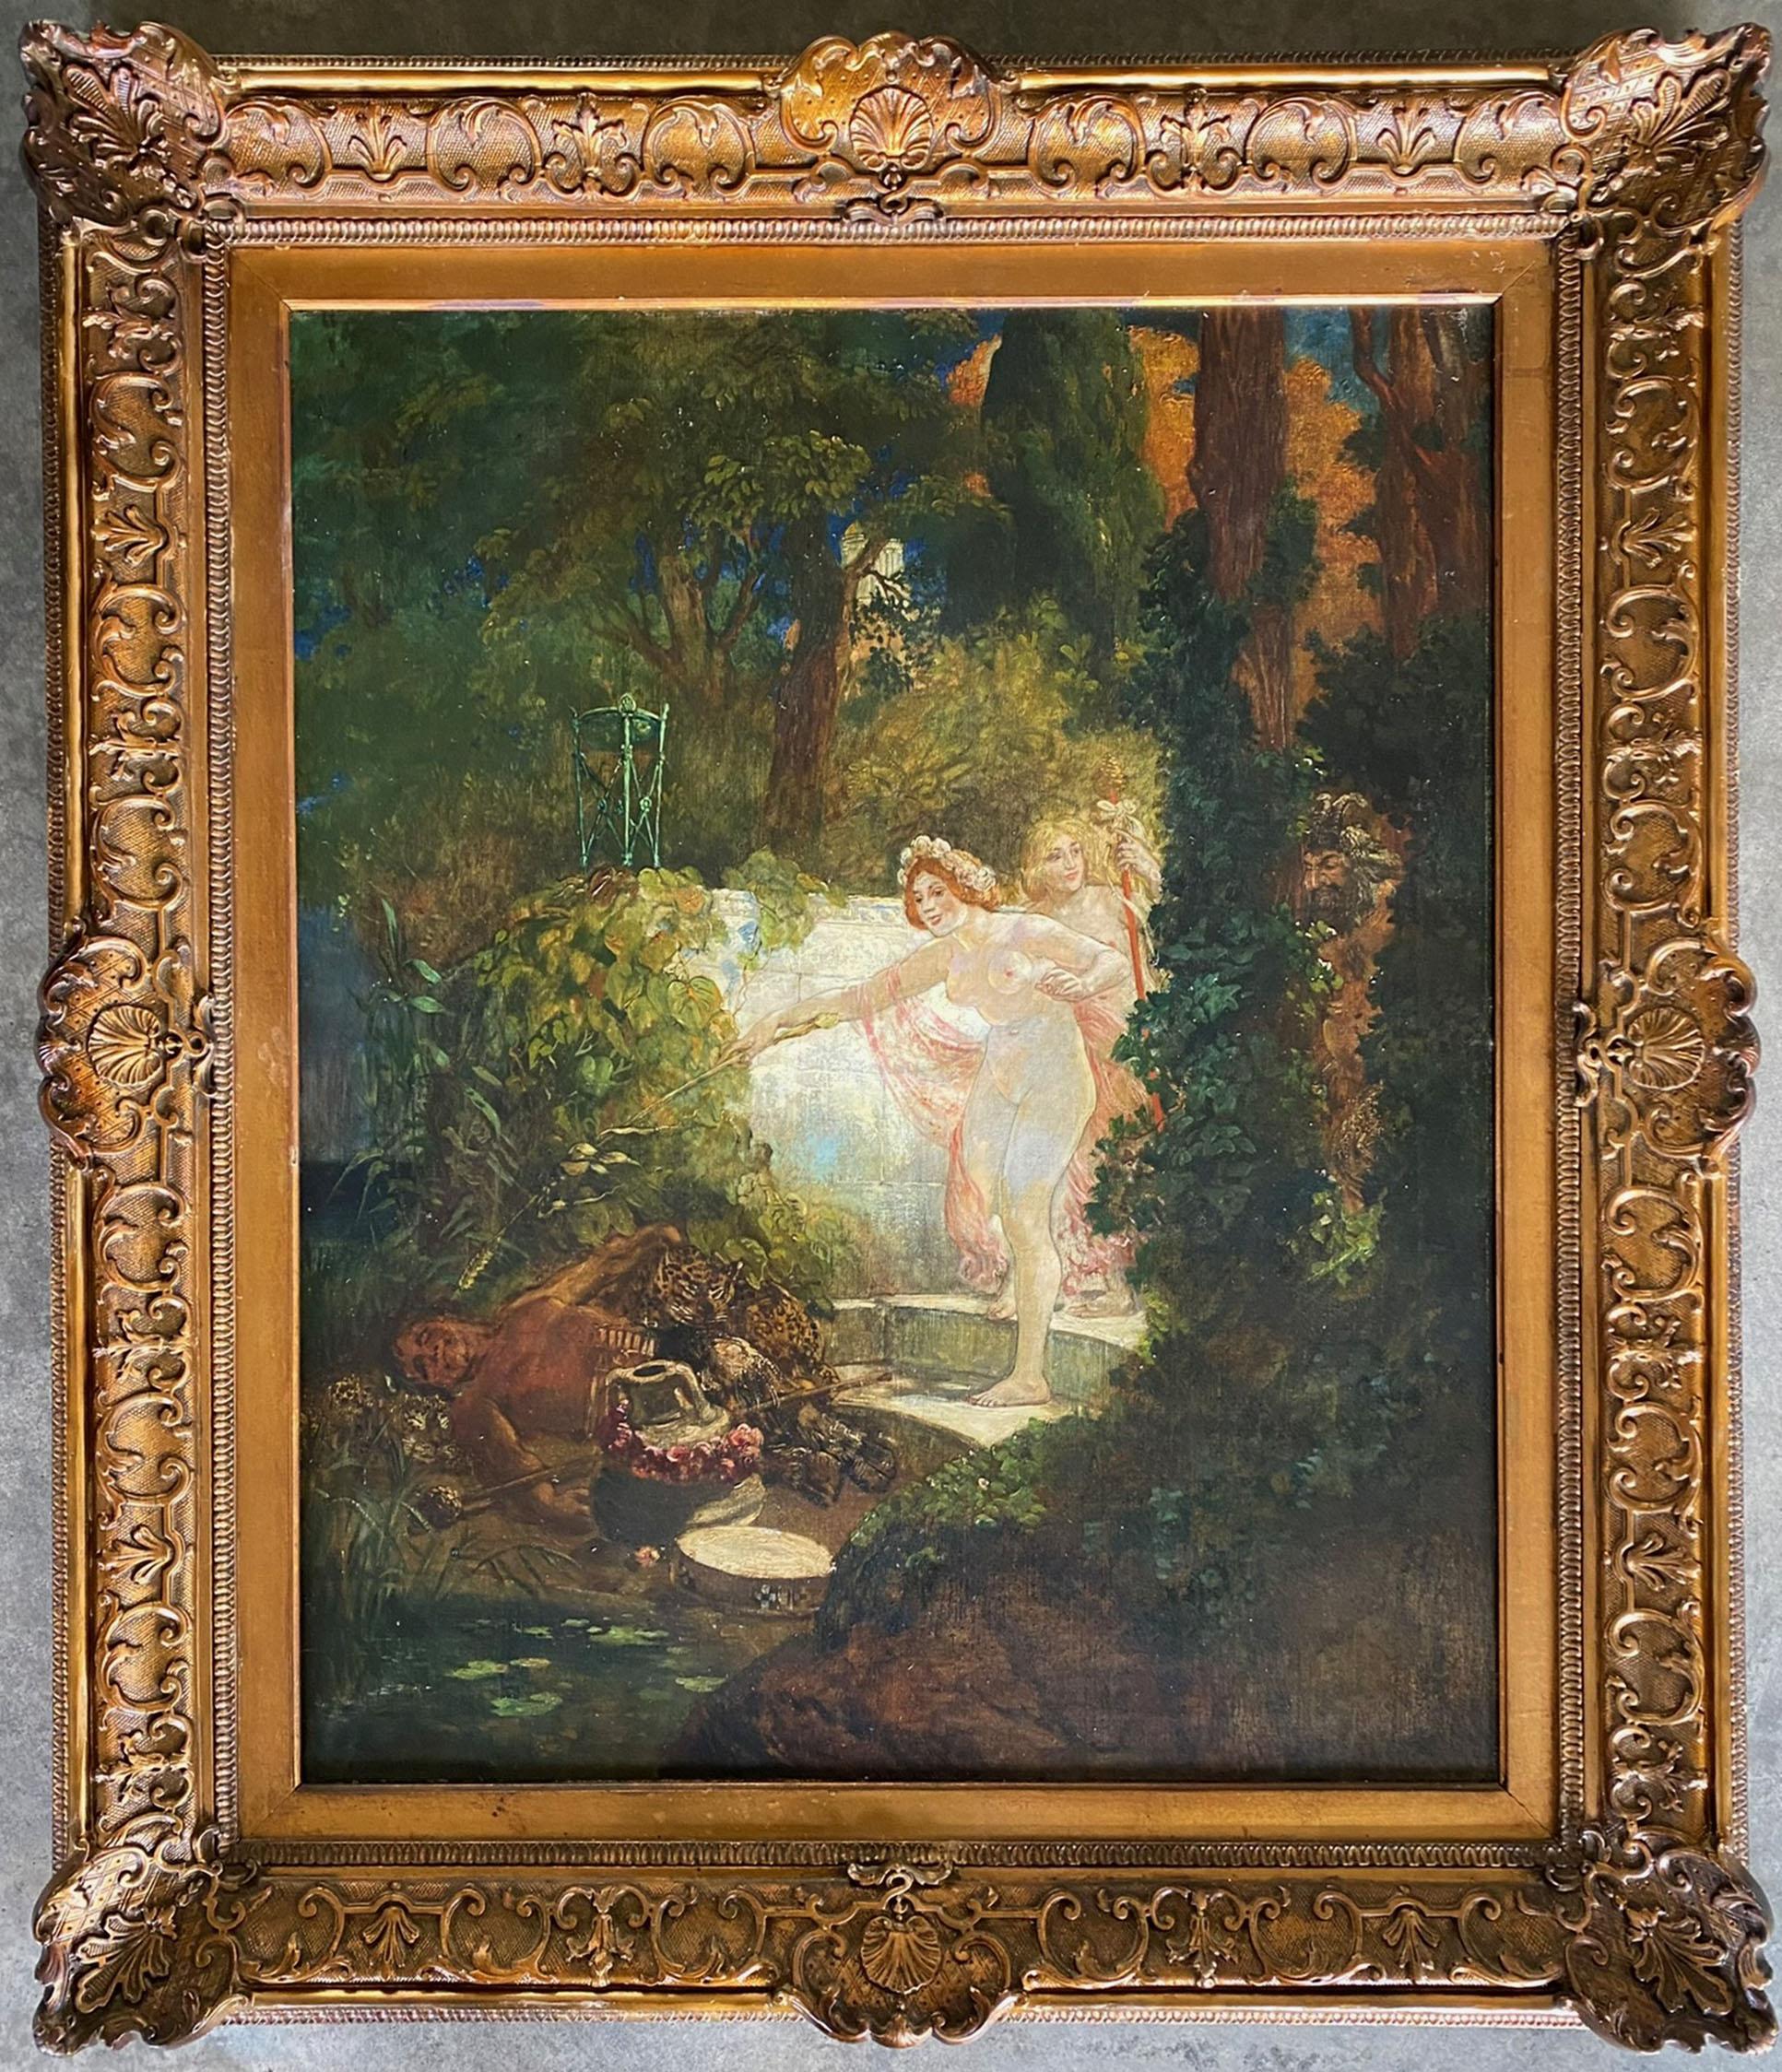 BACCANALE IN THE FOREST - Painting by Alexander Frenz